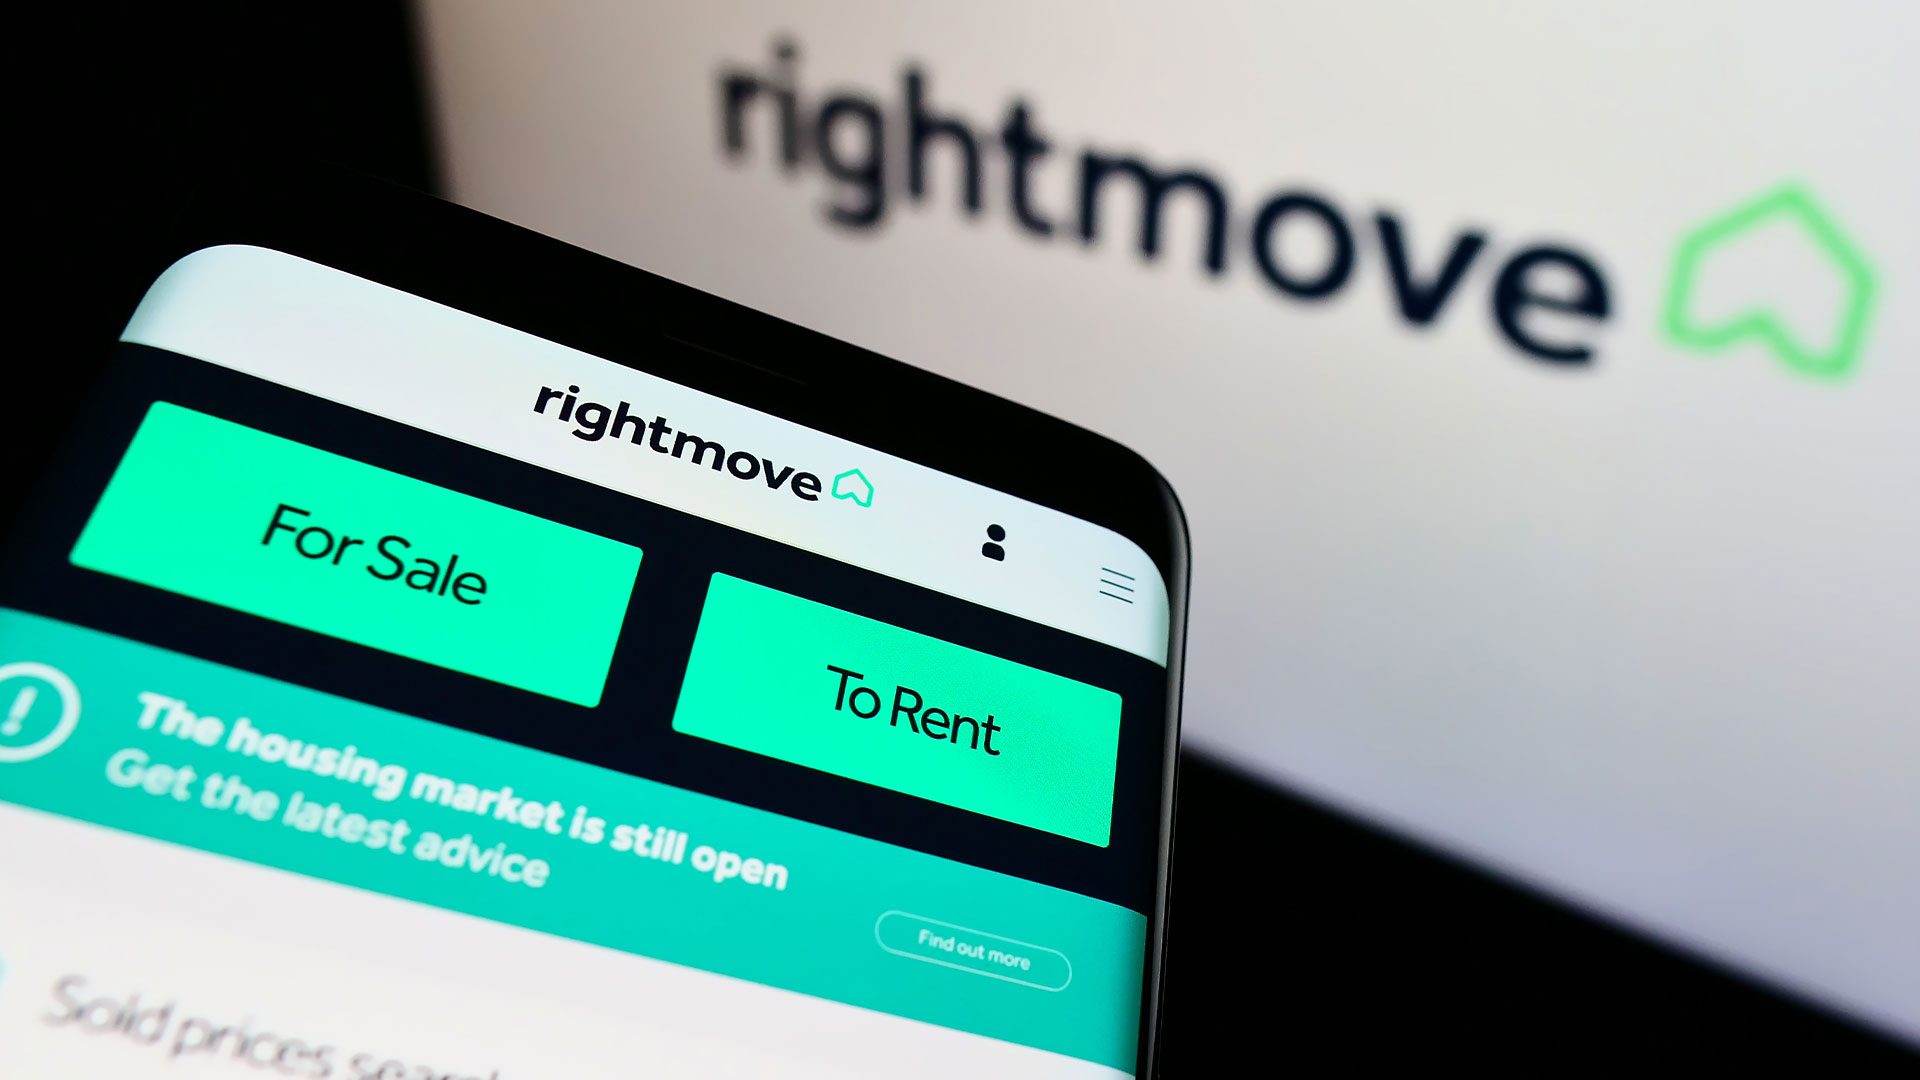 Person holding a phone with the Rightmove app opened